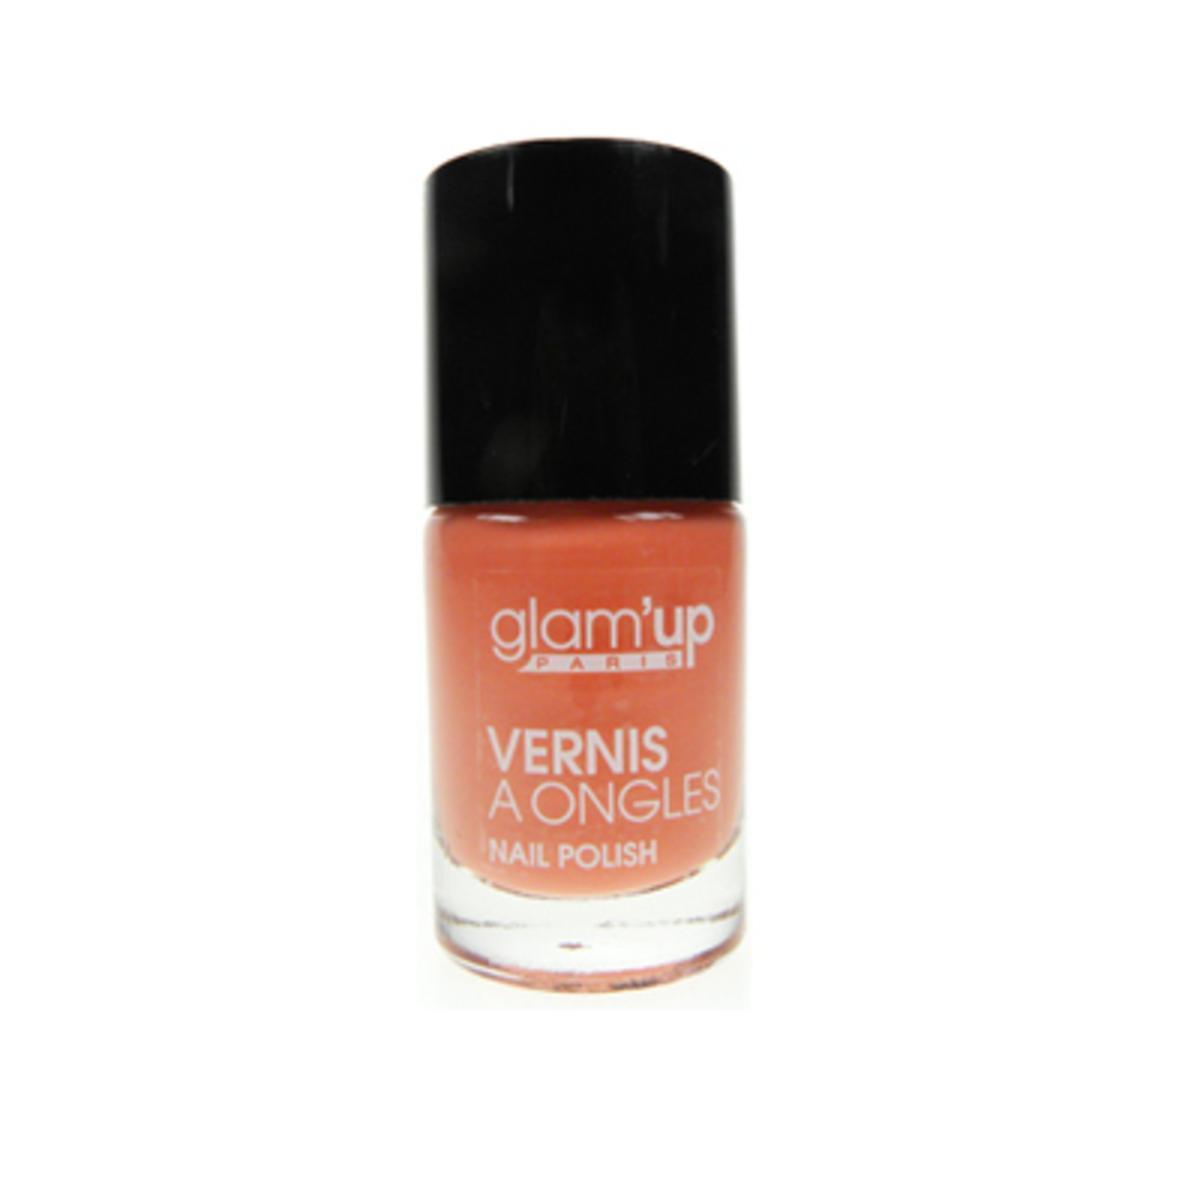 Vernis à ongles Glam'Up corail